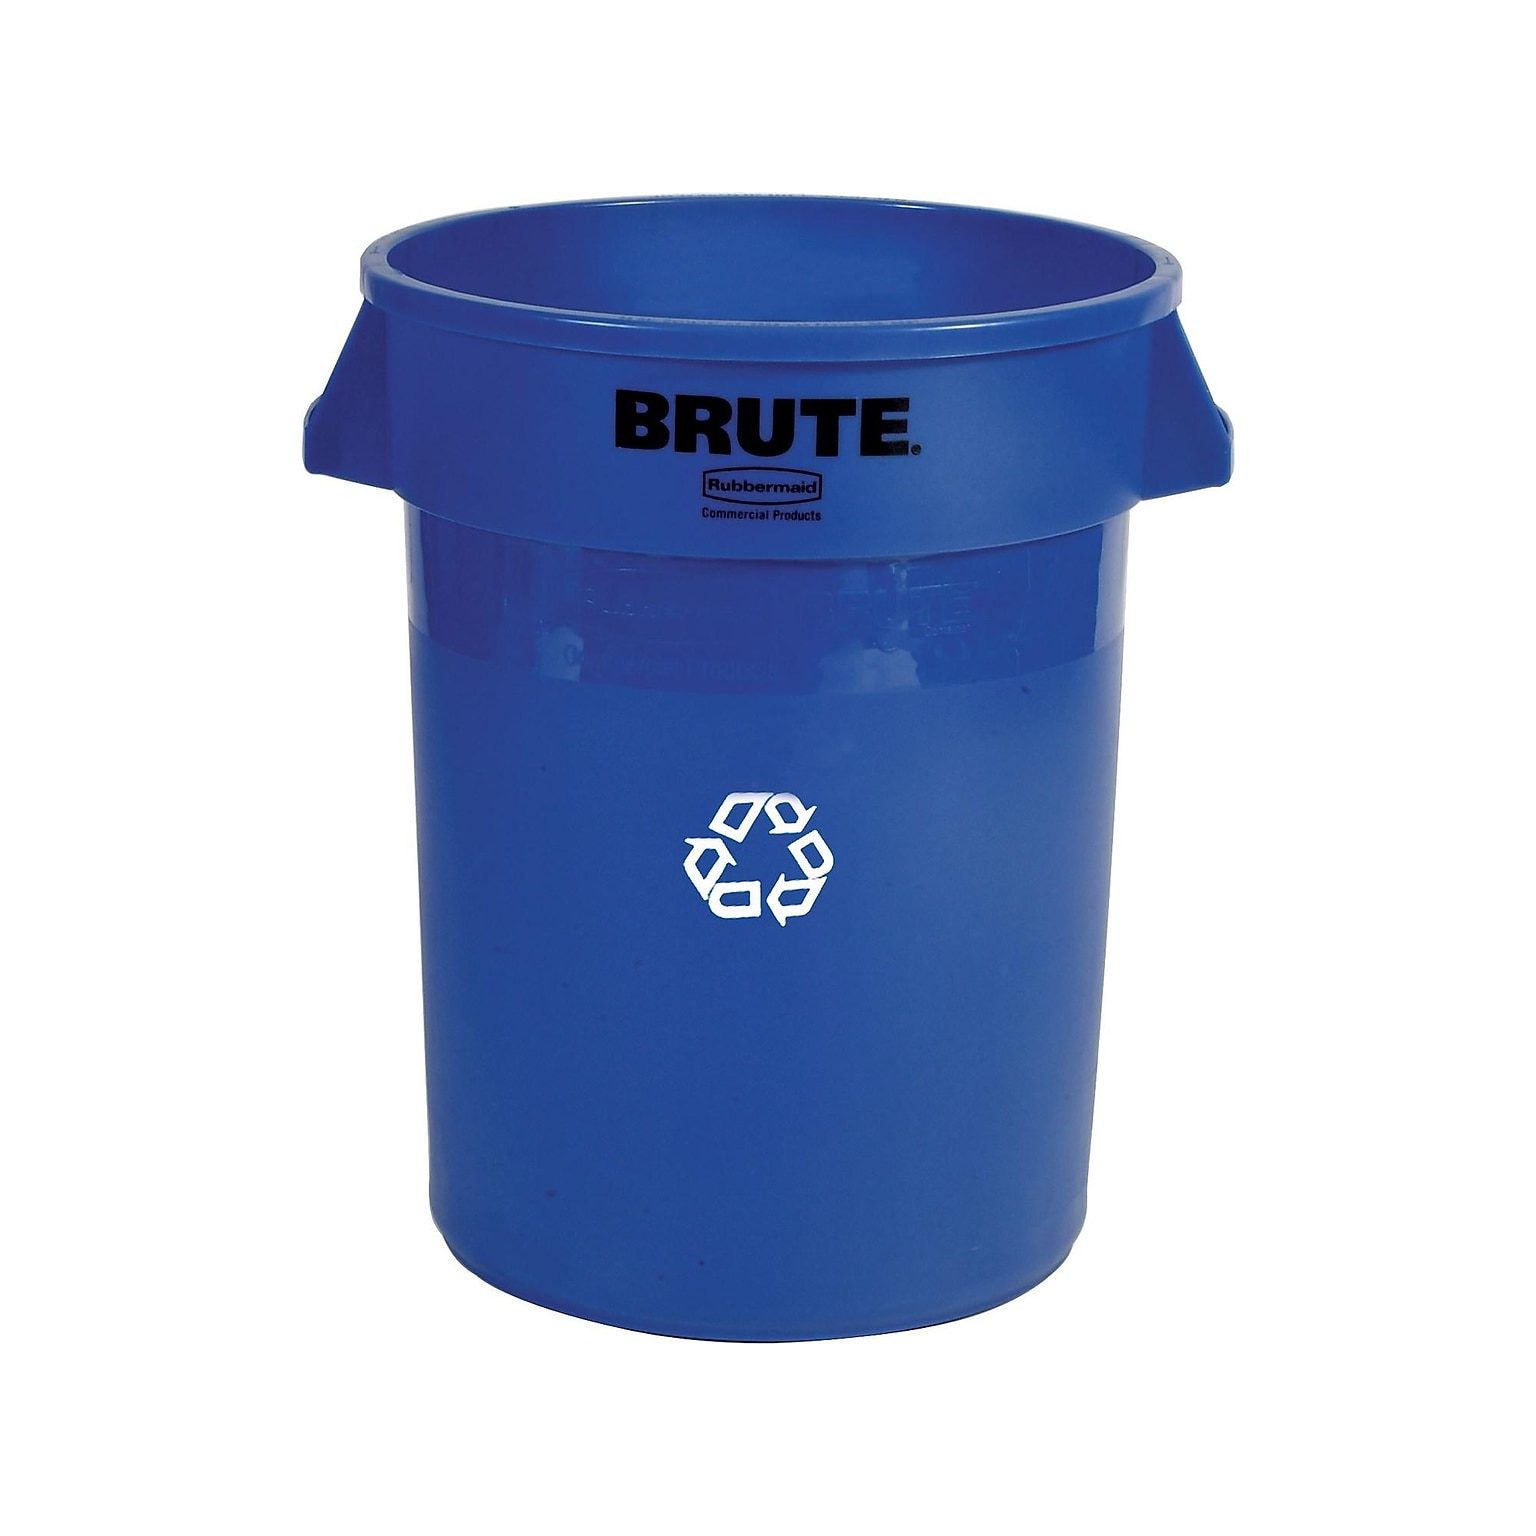 Rubbermaid Commercial Products Brute Resin Recycling Container, 32 Gallon, Blue (FG263273BLUE)